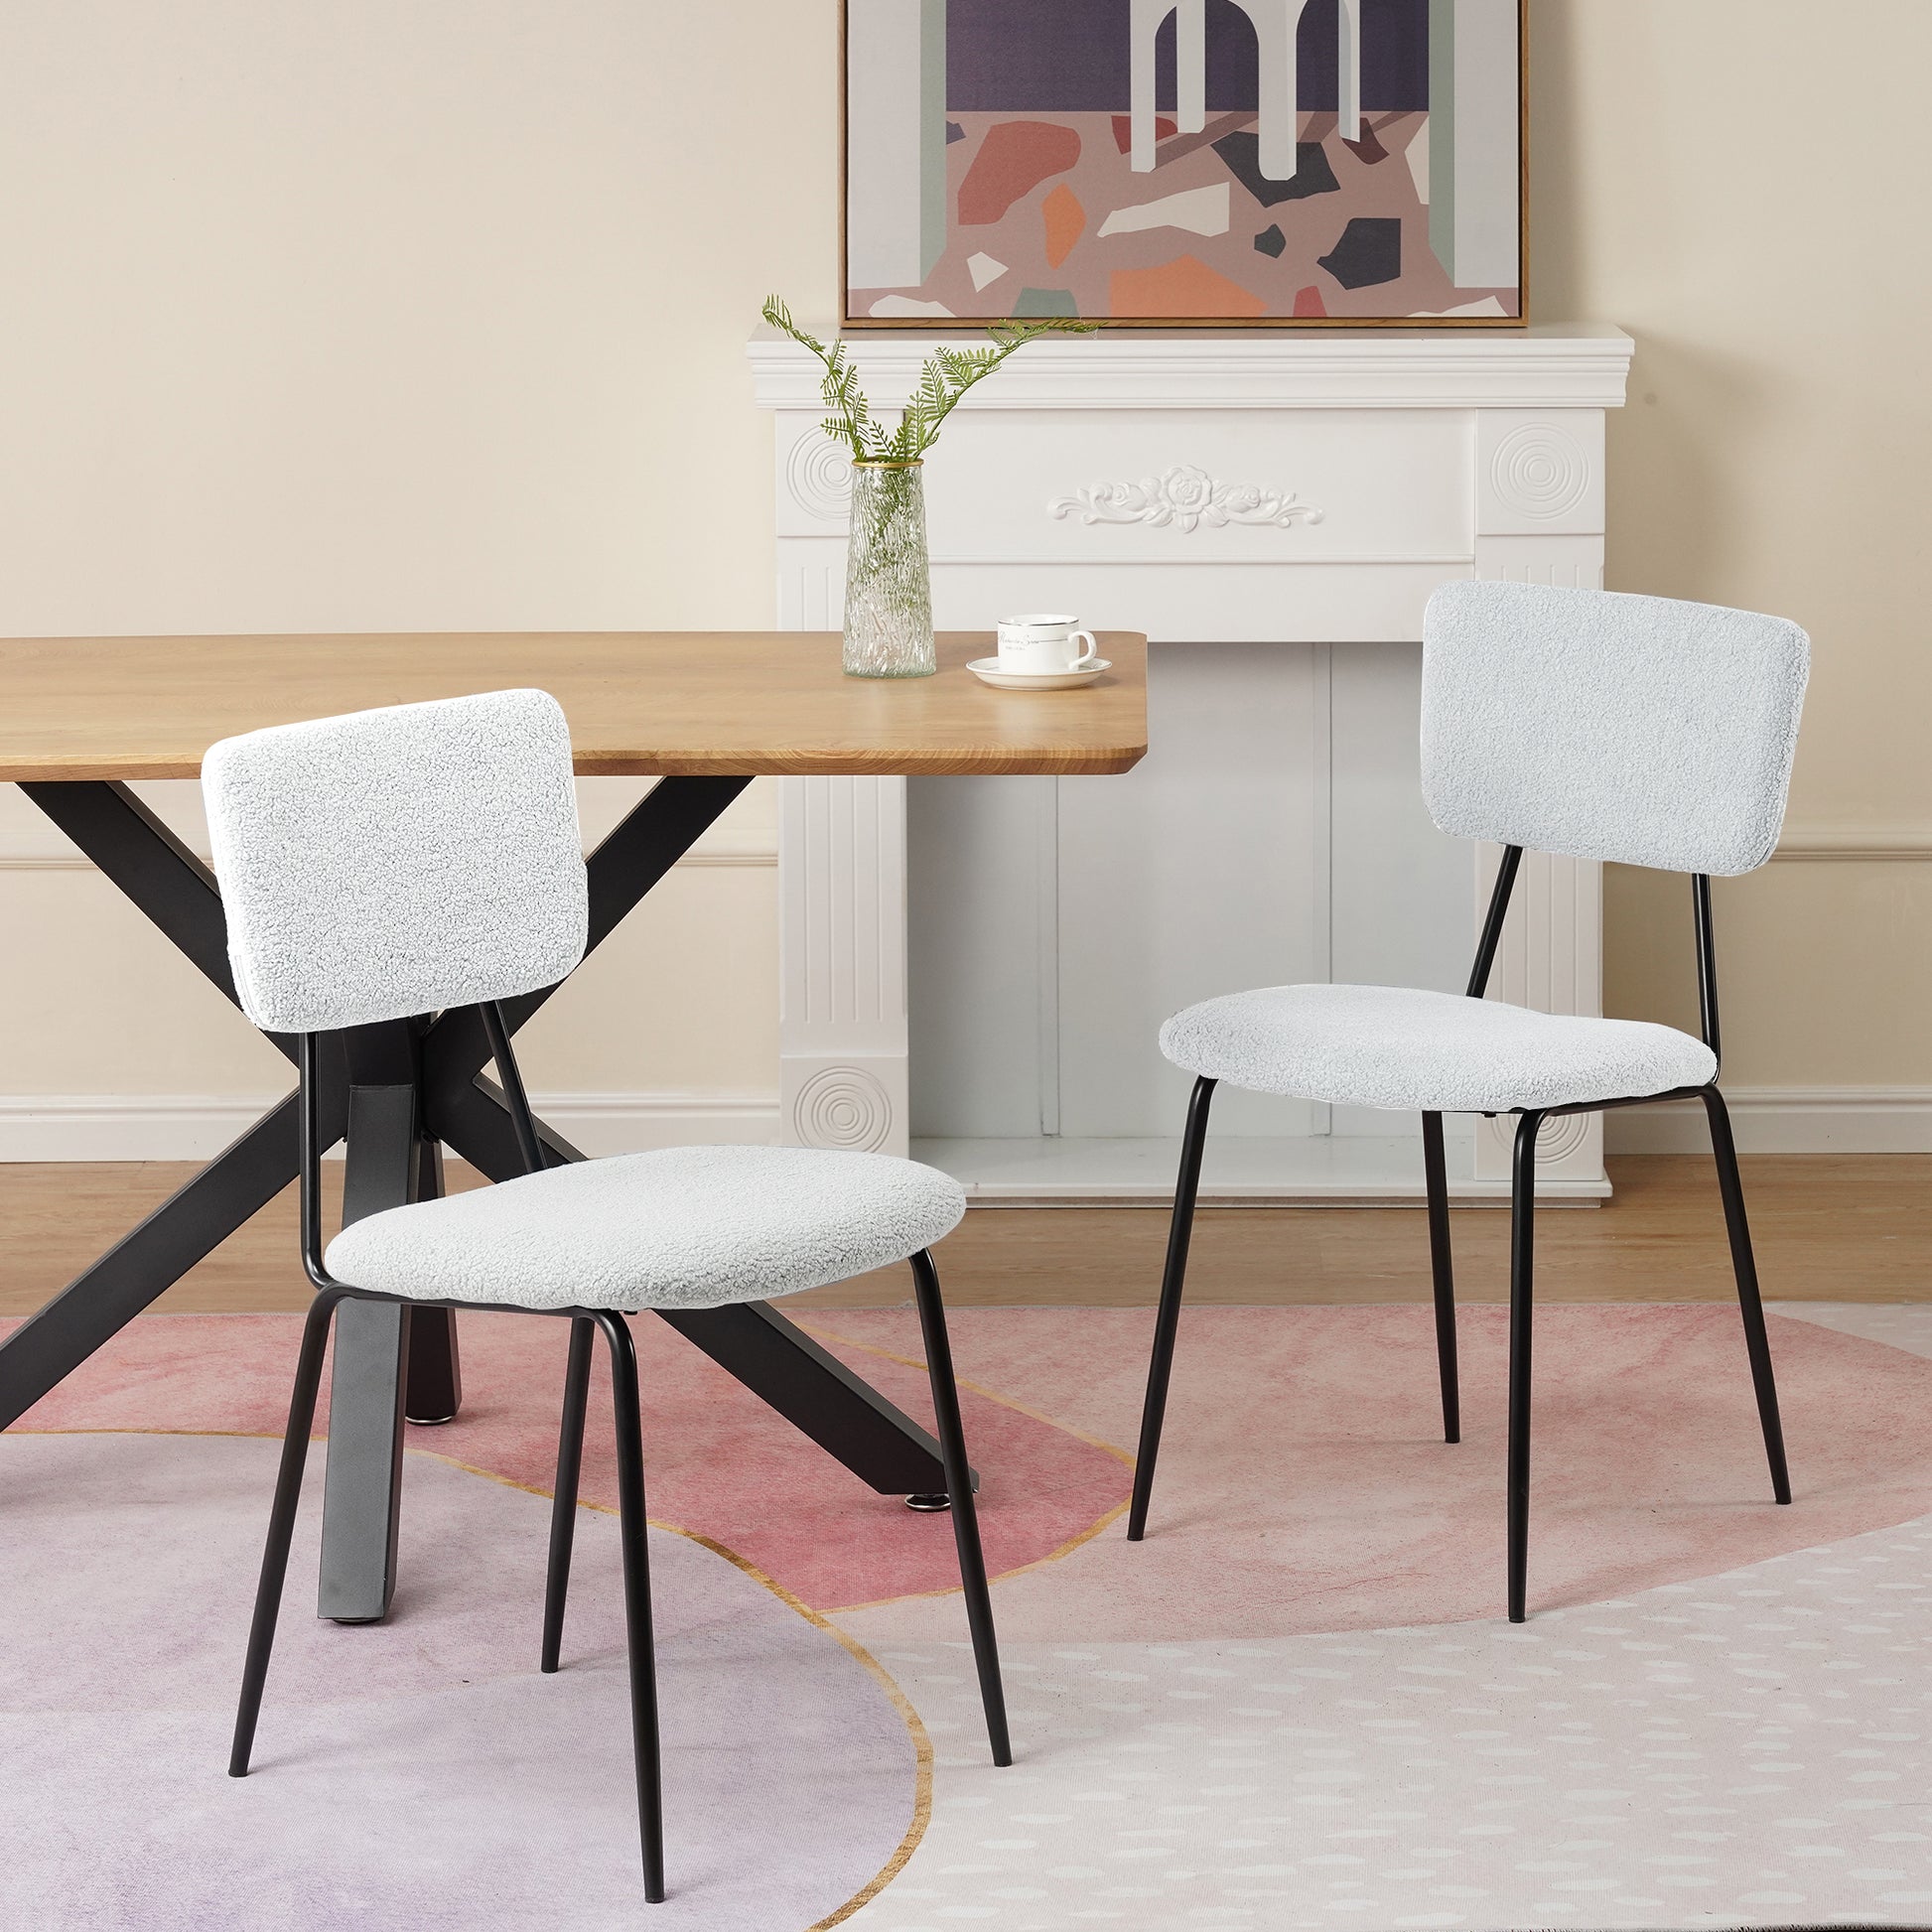 Dining Room Chairs Set of 2, Modern Comfortable Feature Chairs with Faux Plush Upholstered Back and Chrome Legs, Kitchen Side Chairs for Indoor Use: Home, Apartment (2 White Chairs) - Enova Luxe Home Store